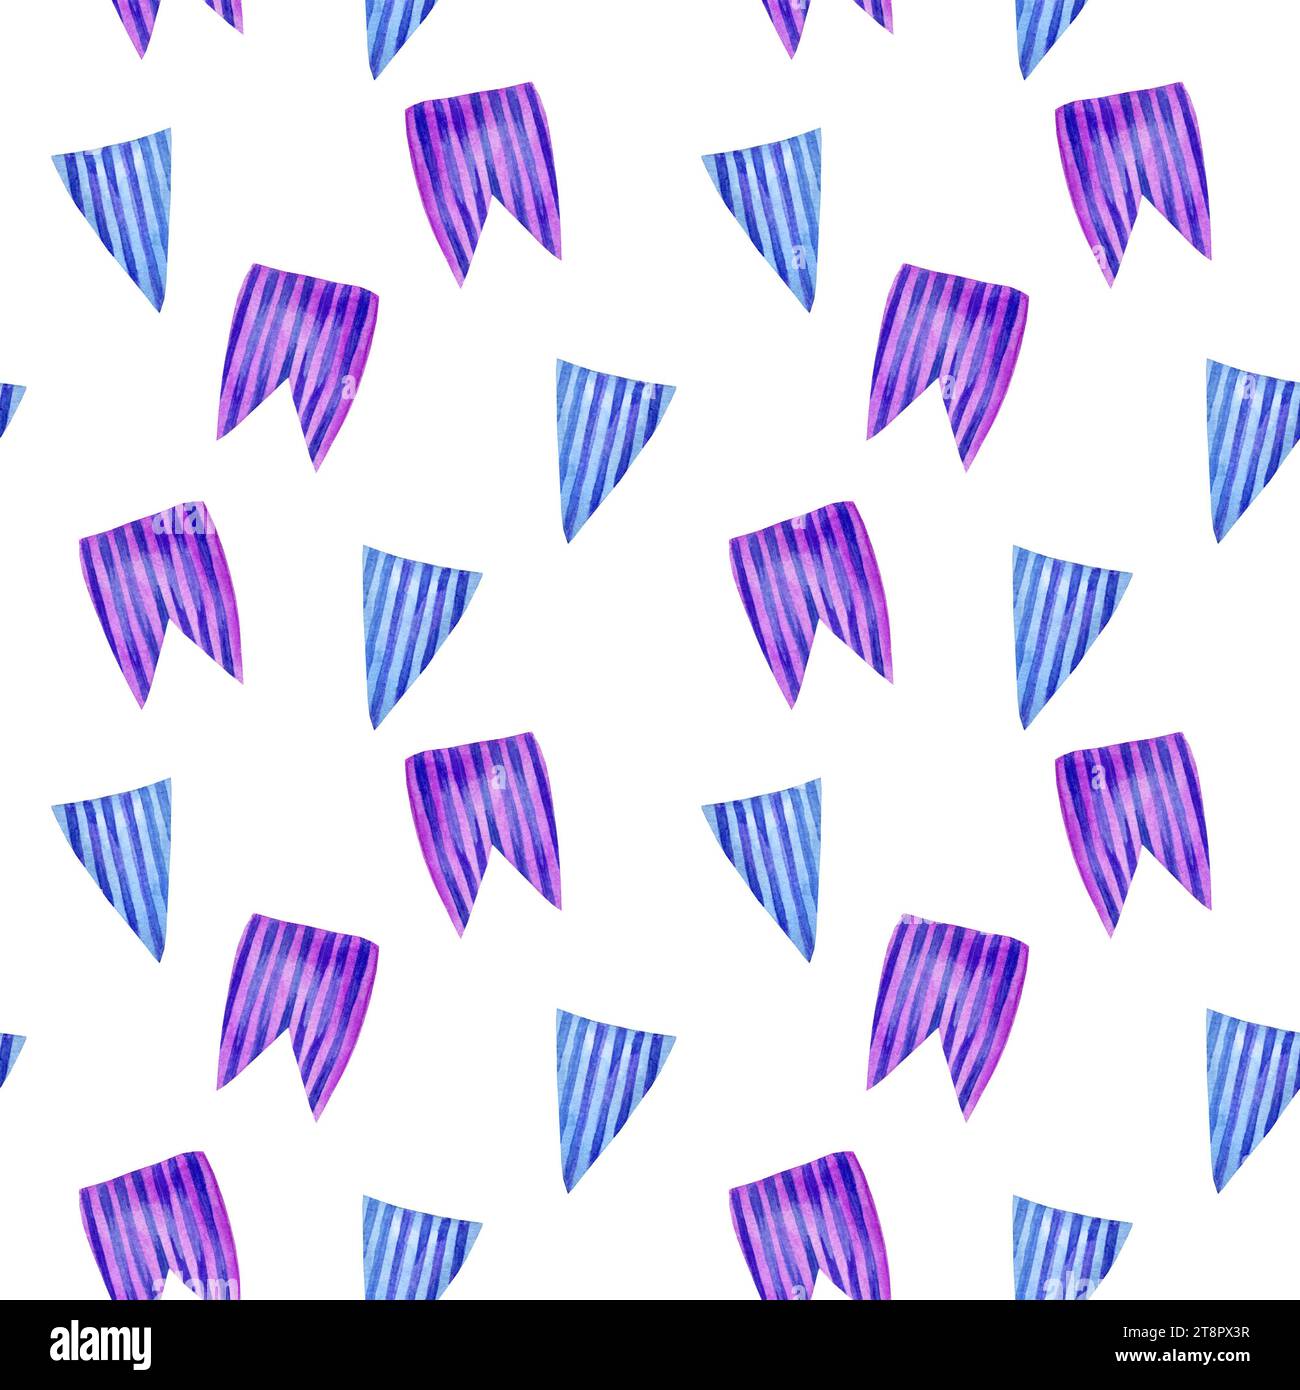 Watercolor seamless pattern with different striped flags, hand drawn illustration of garland of blue, purple flags isolated on white background. Decor Stock Photo